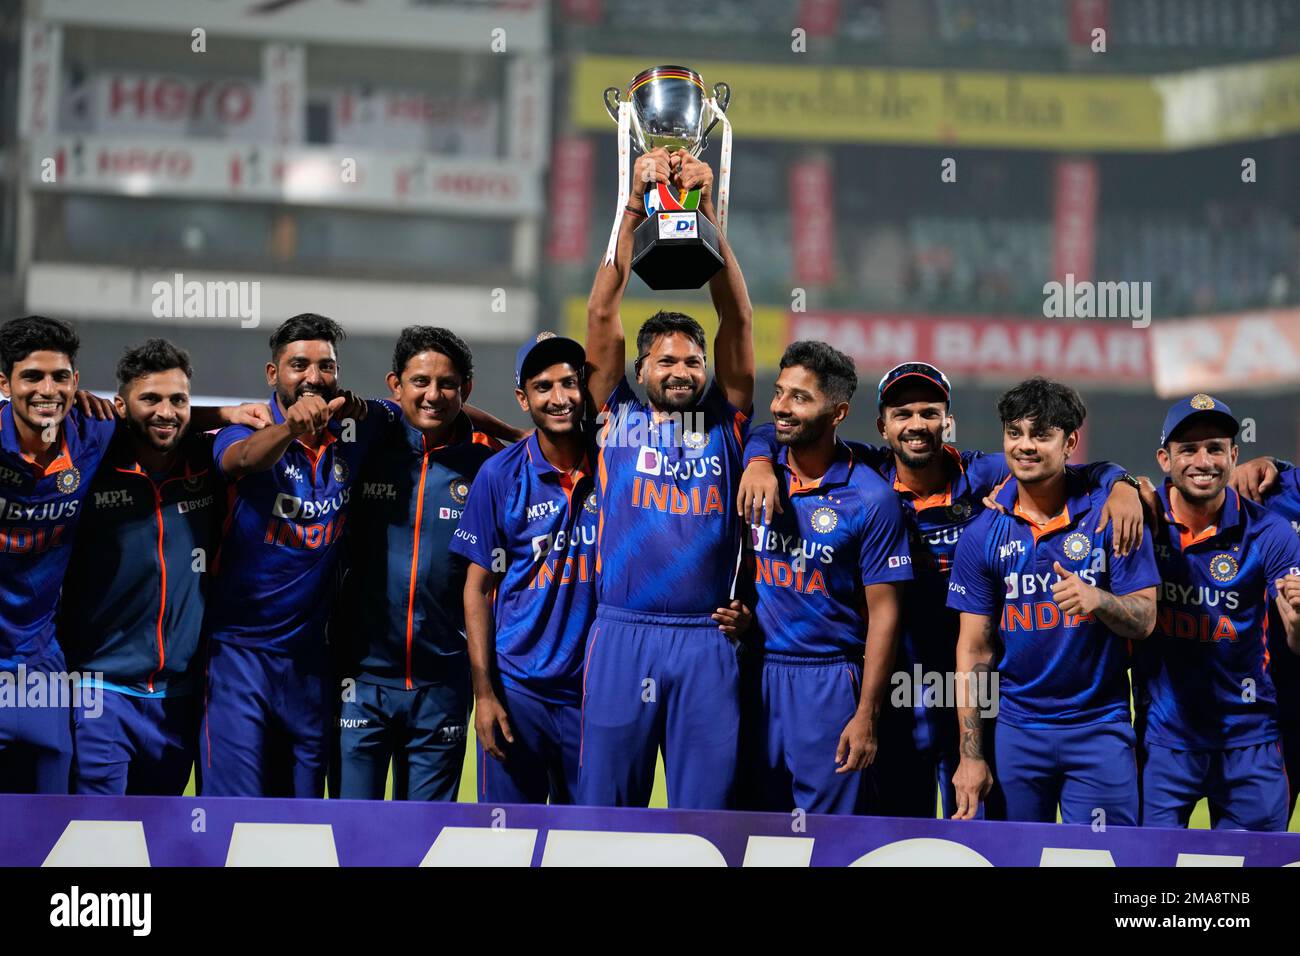 Indian cricket team player celebrate with Mastercard One day international cricket match trophy during India-South Africa series, New Delhi, India, Tuesday, Oct